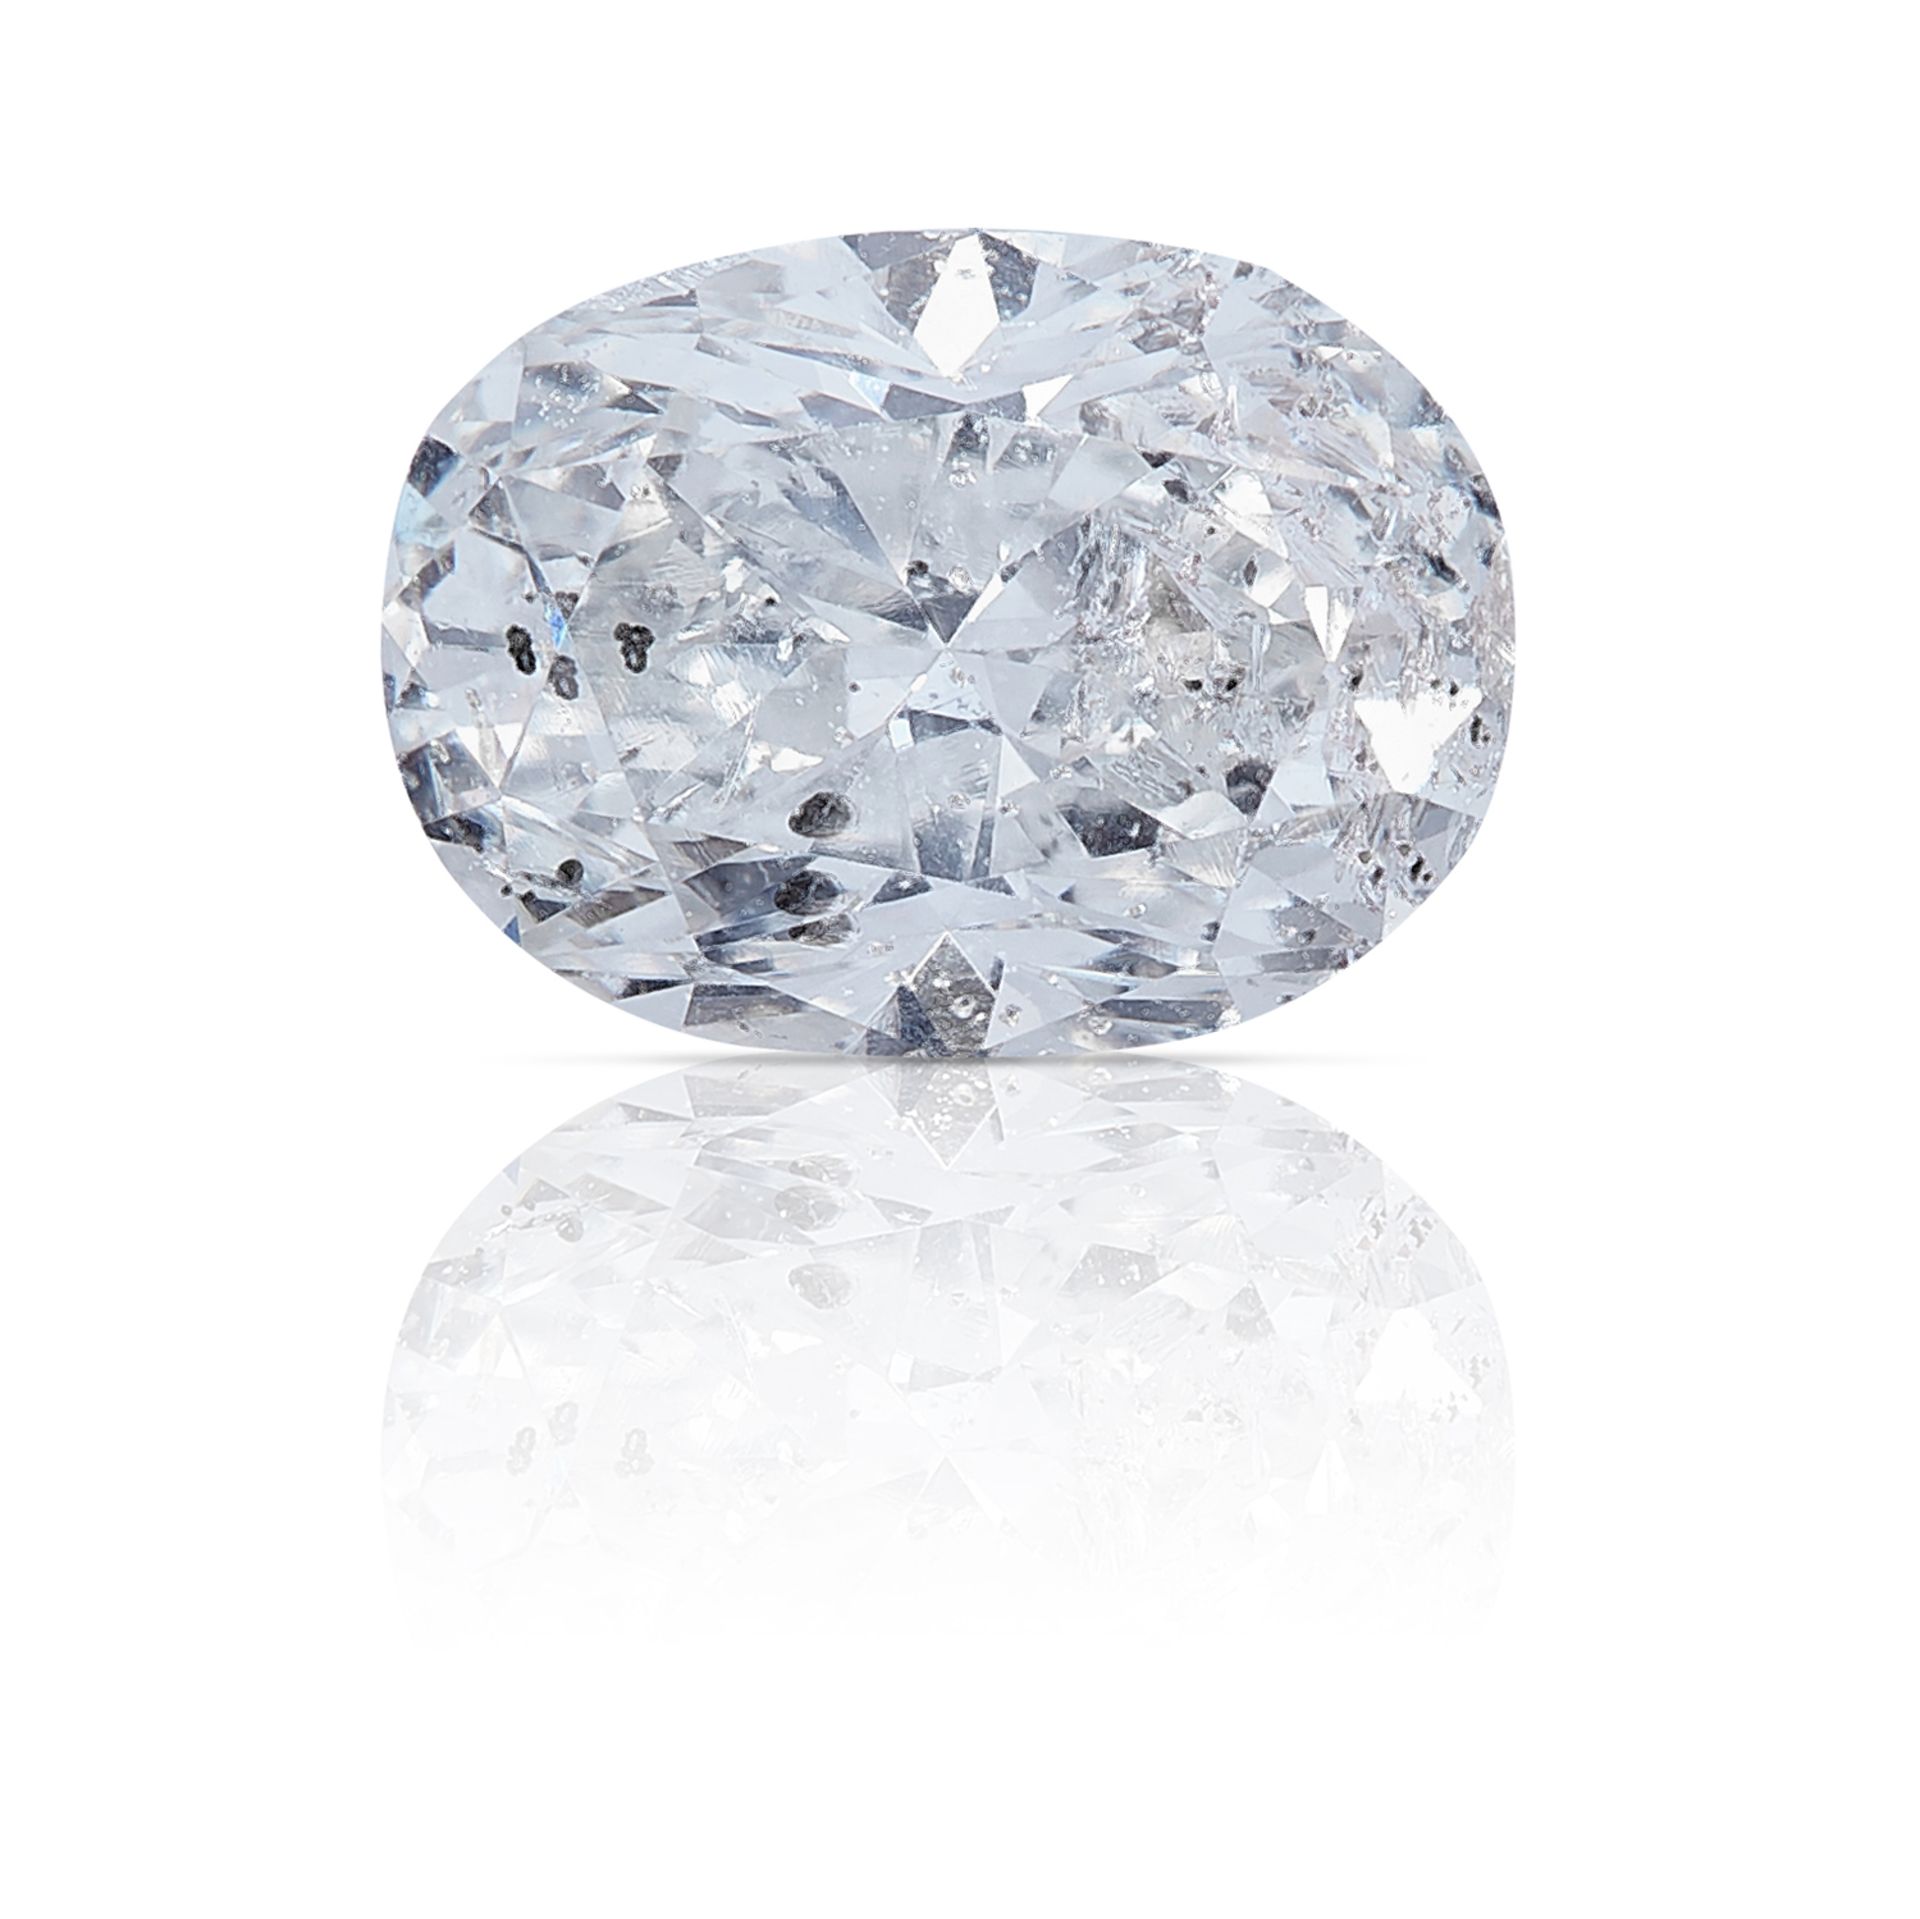 AN OVAL SHAPED BRILLIANT CUT DIAMOND TOTALLING 0.65cts, UNMOUNTED.